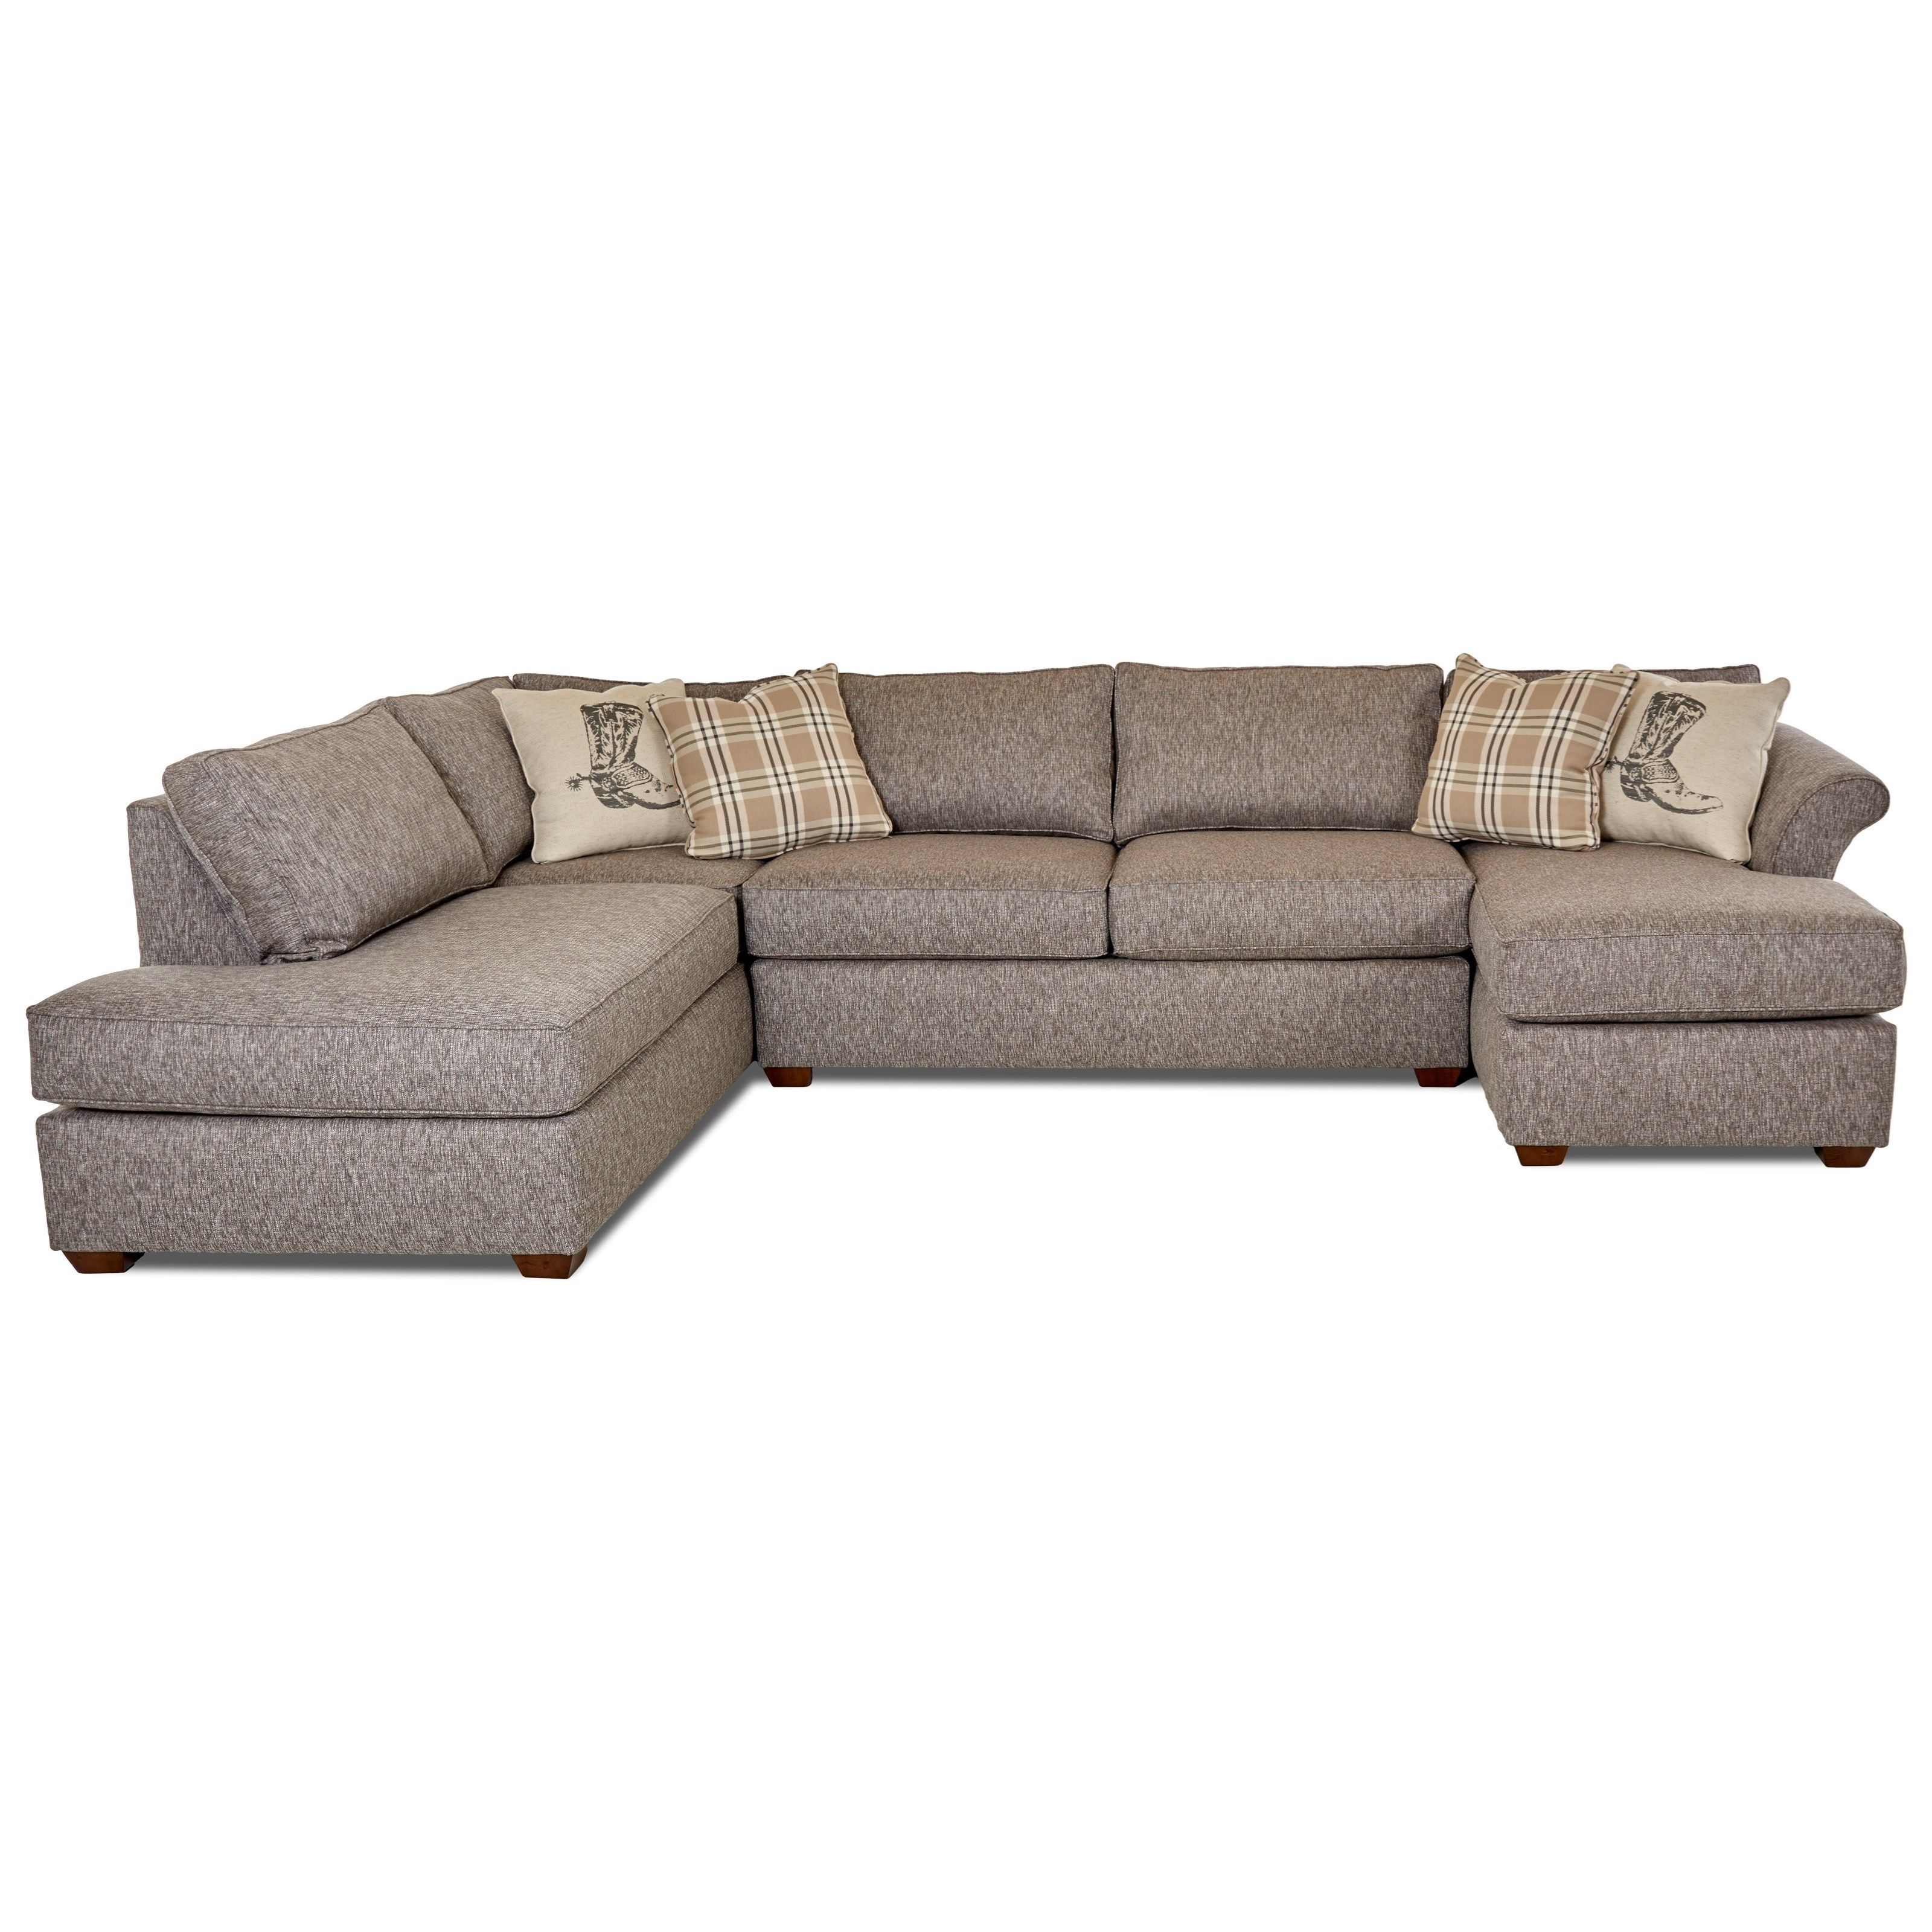 Klaussner Jaxon Three Piece Sectional Sofa With Flared Arms And Laf With Regard To Jaxon Grey Sideboards (View 27 of 30)